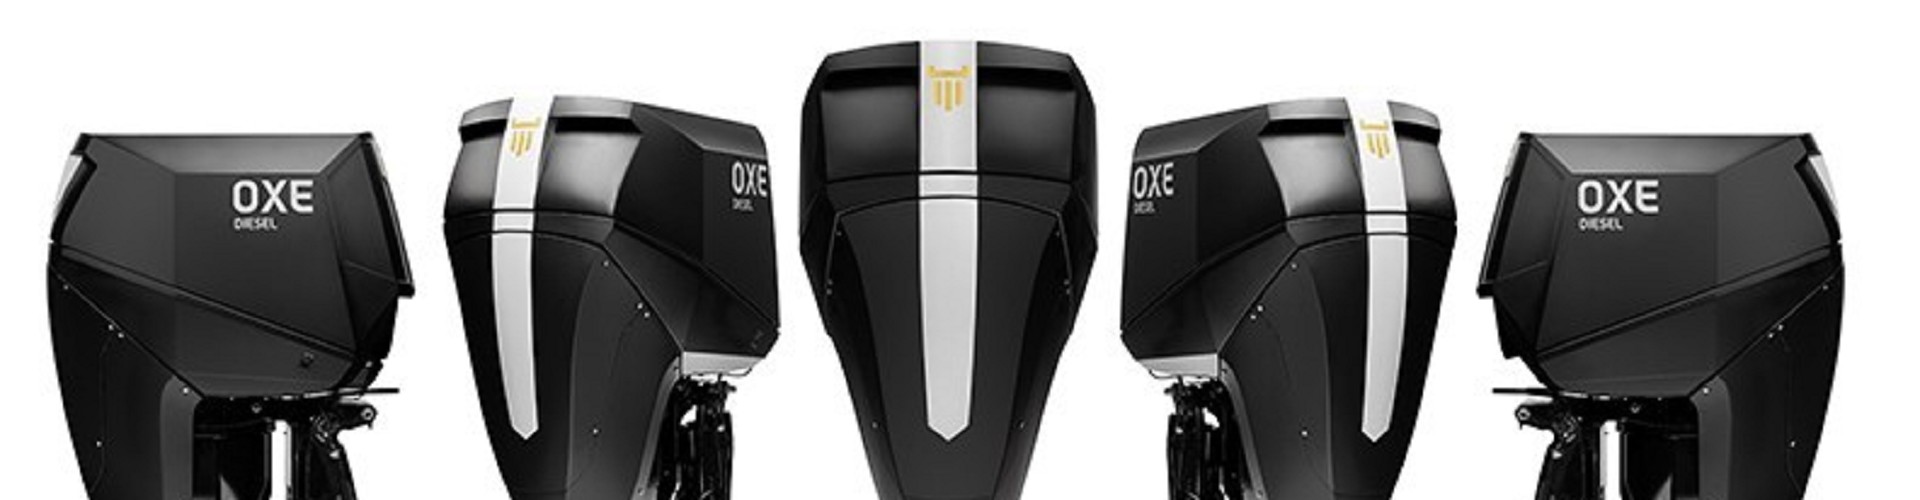 OXE outboard Diesel